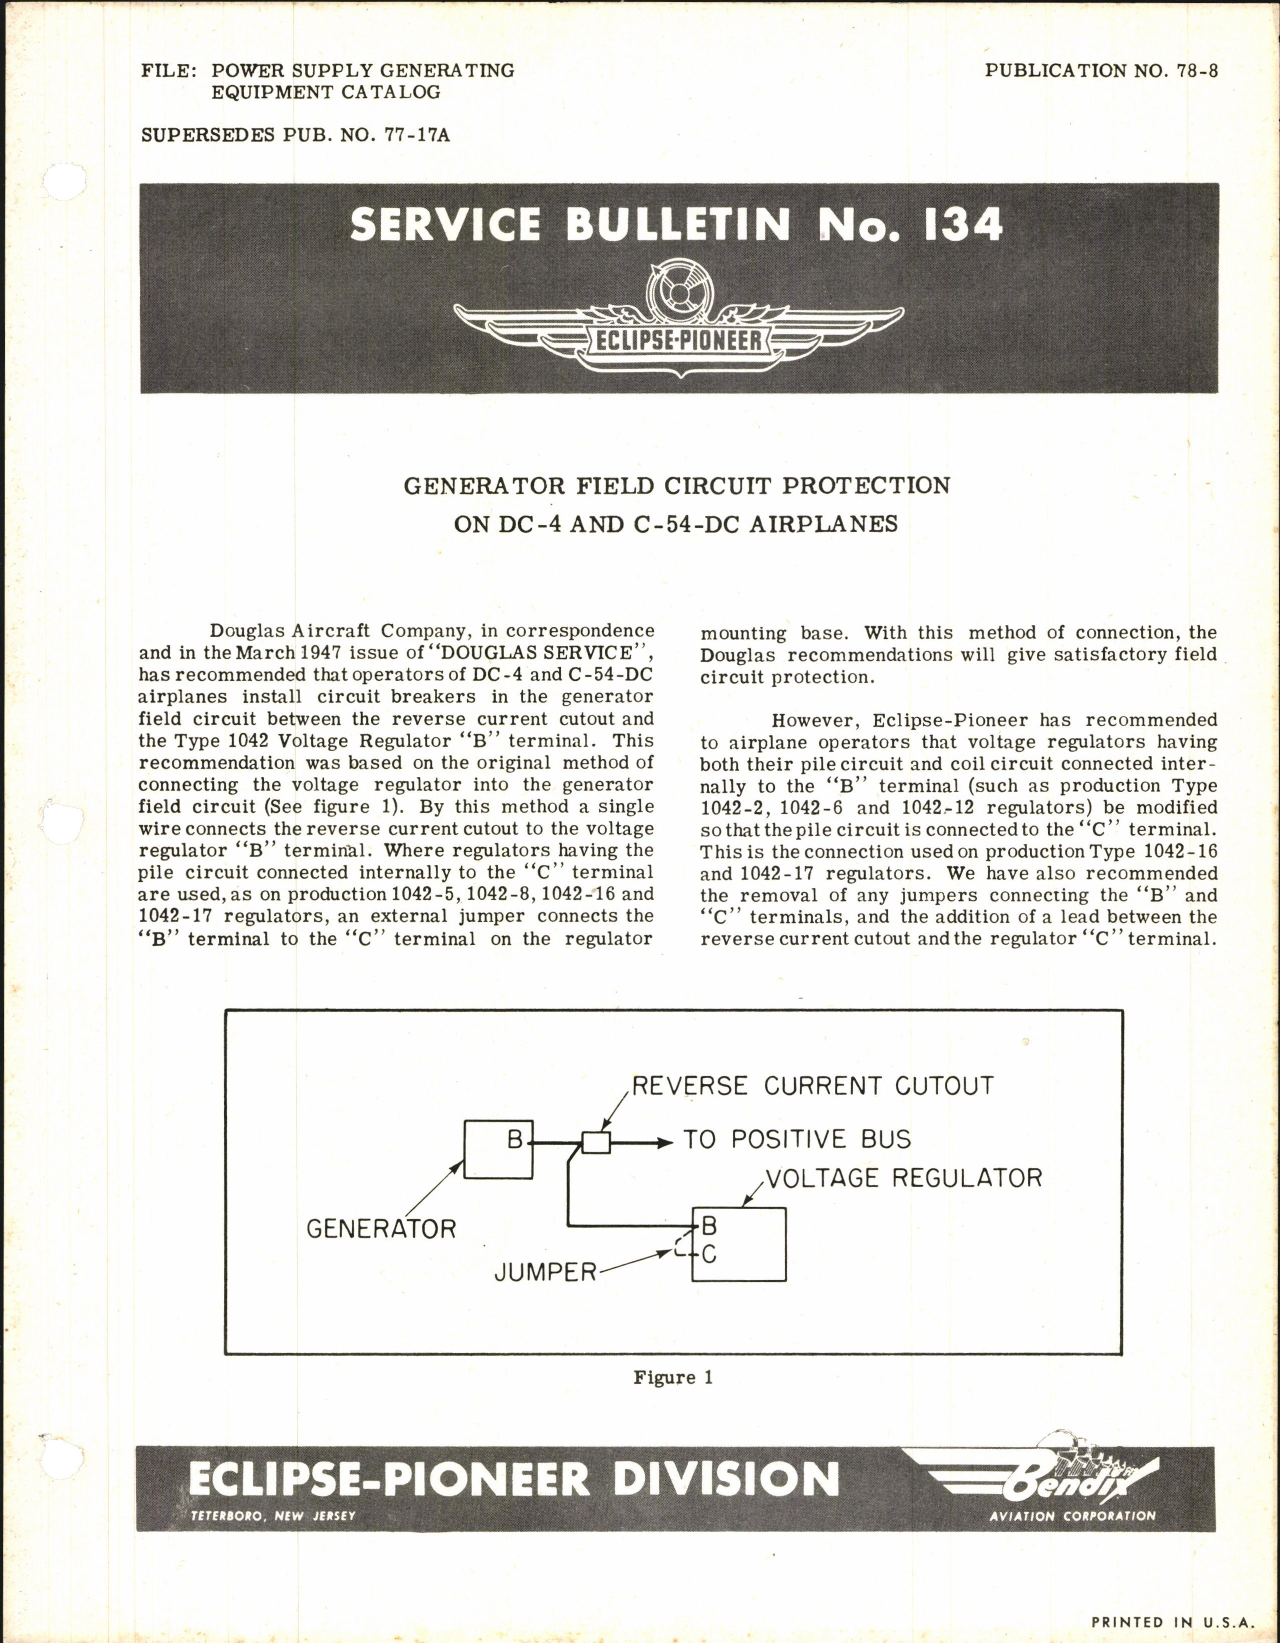 Sample page 1 from AirCorps Library document: Generator Field Circuit Protection on DC-4 and C-54-DC Airplanes